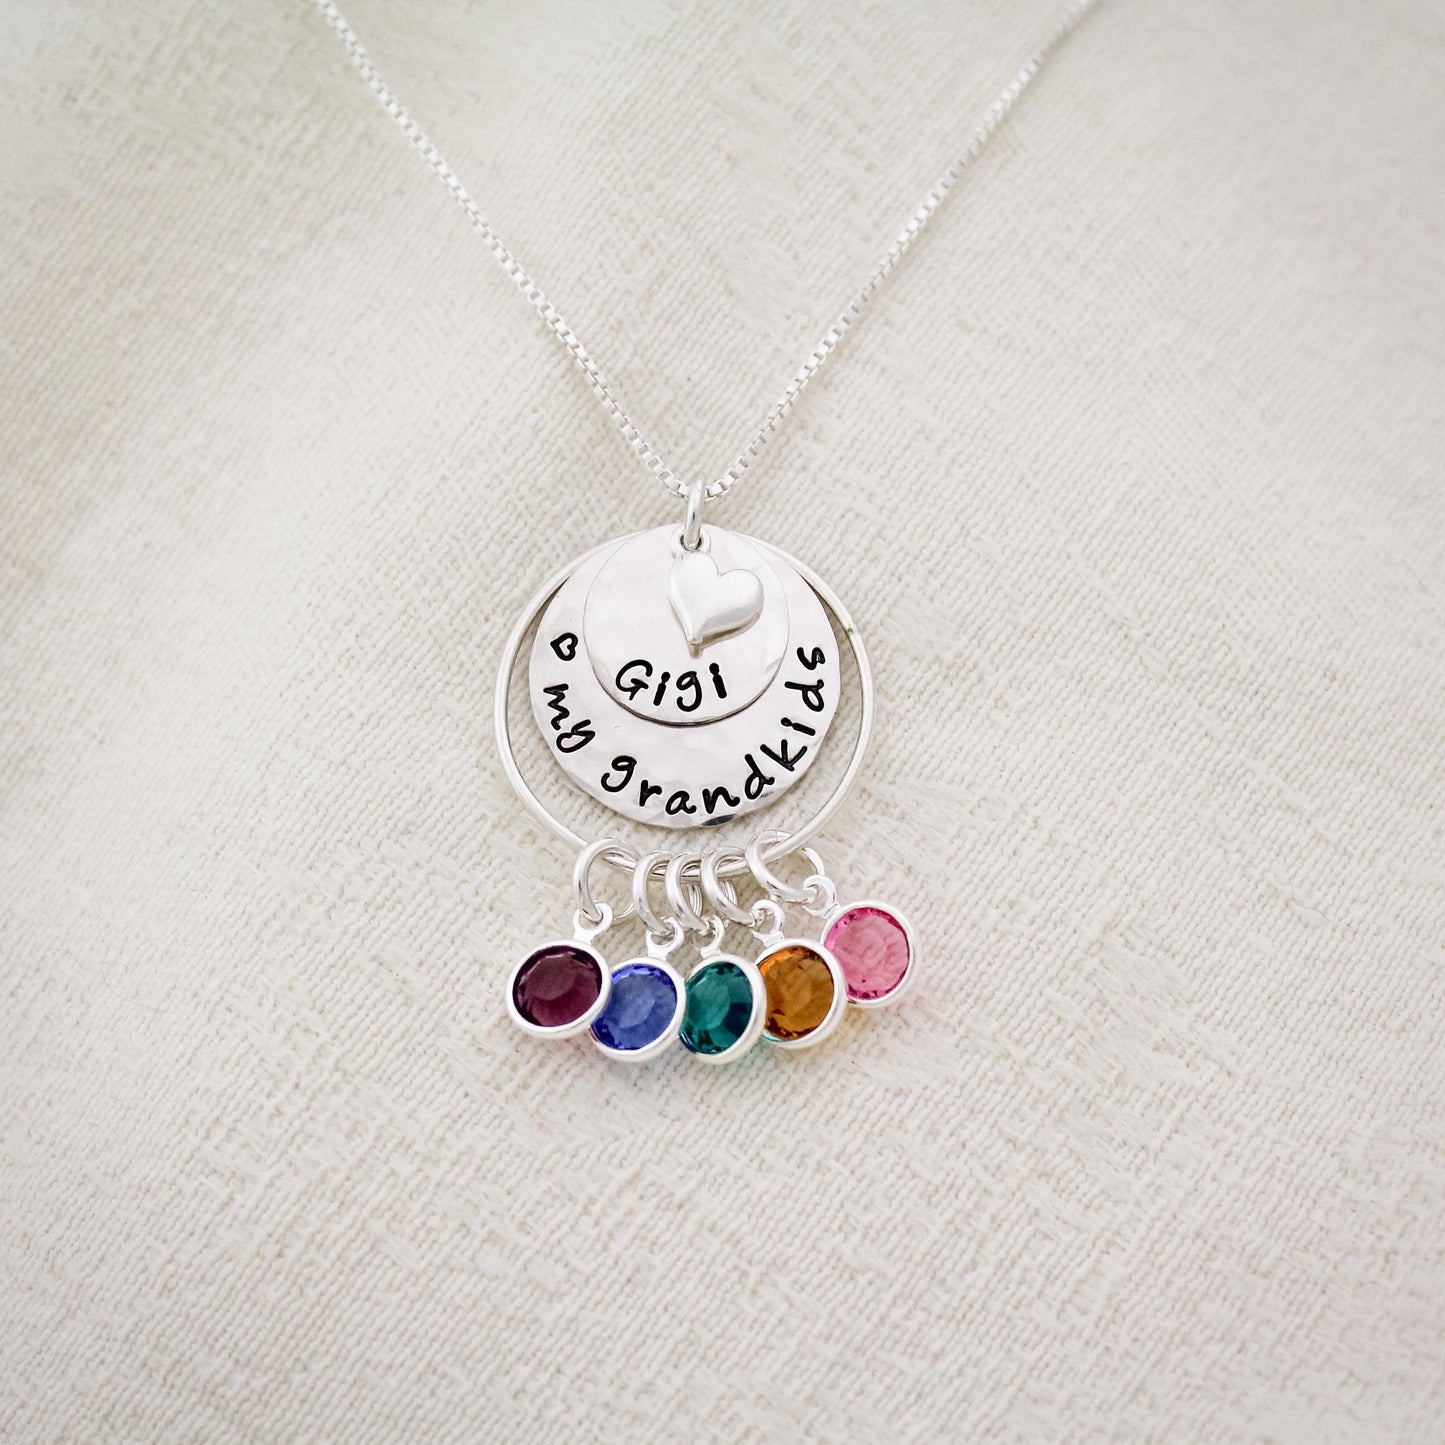 Personalized Grandma Necklace, Grandmother Necklace, Birthstone Necklace, Love my Grandchildren Necklace, Hand Stamped, Mother's Day Gift